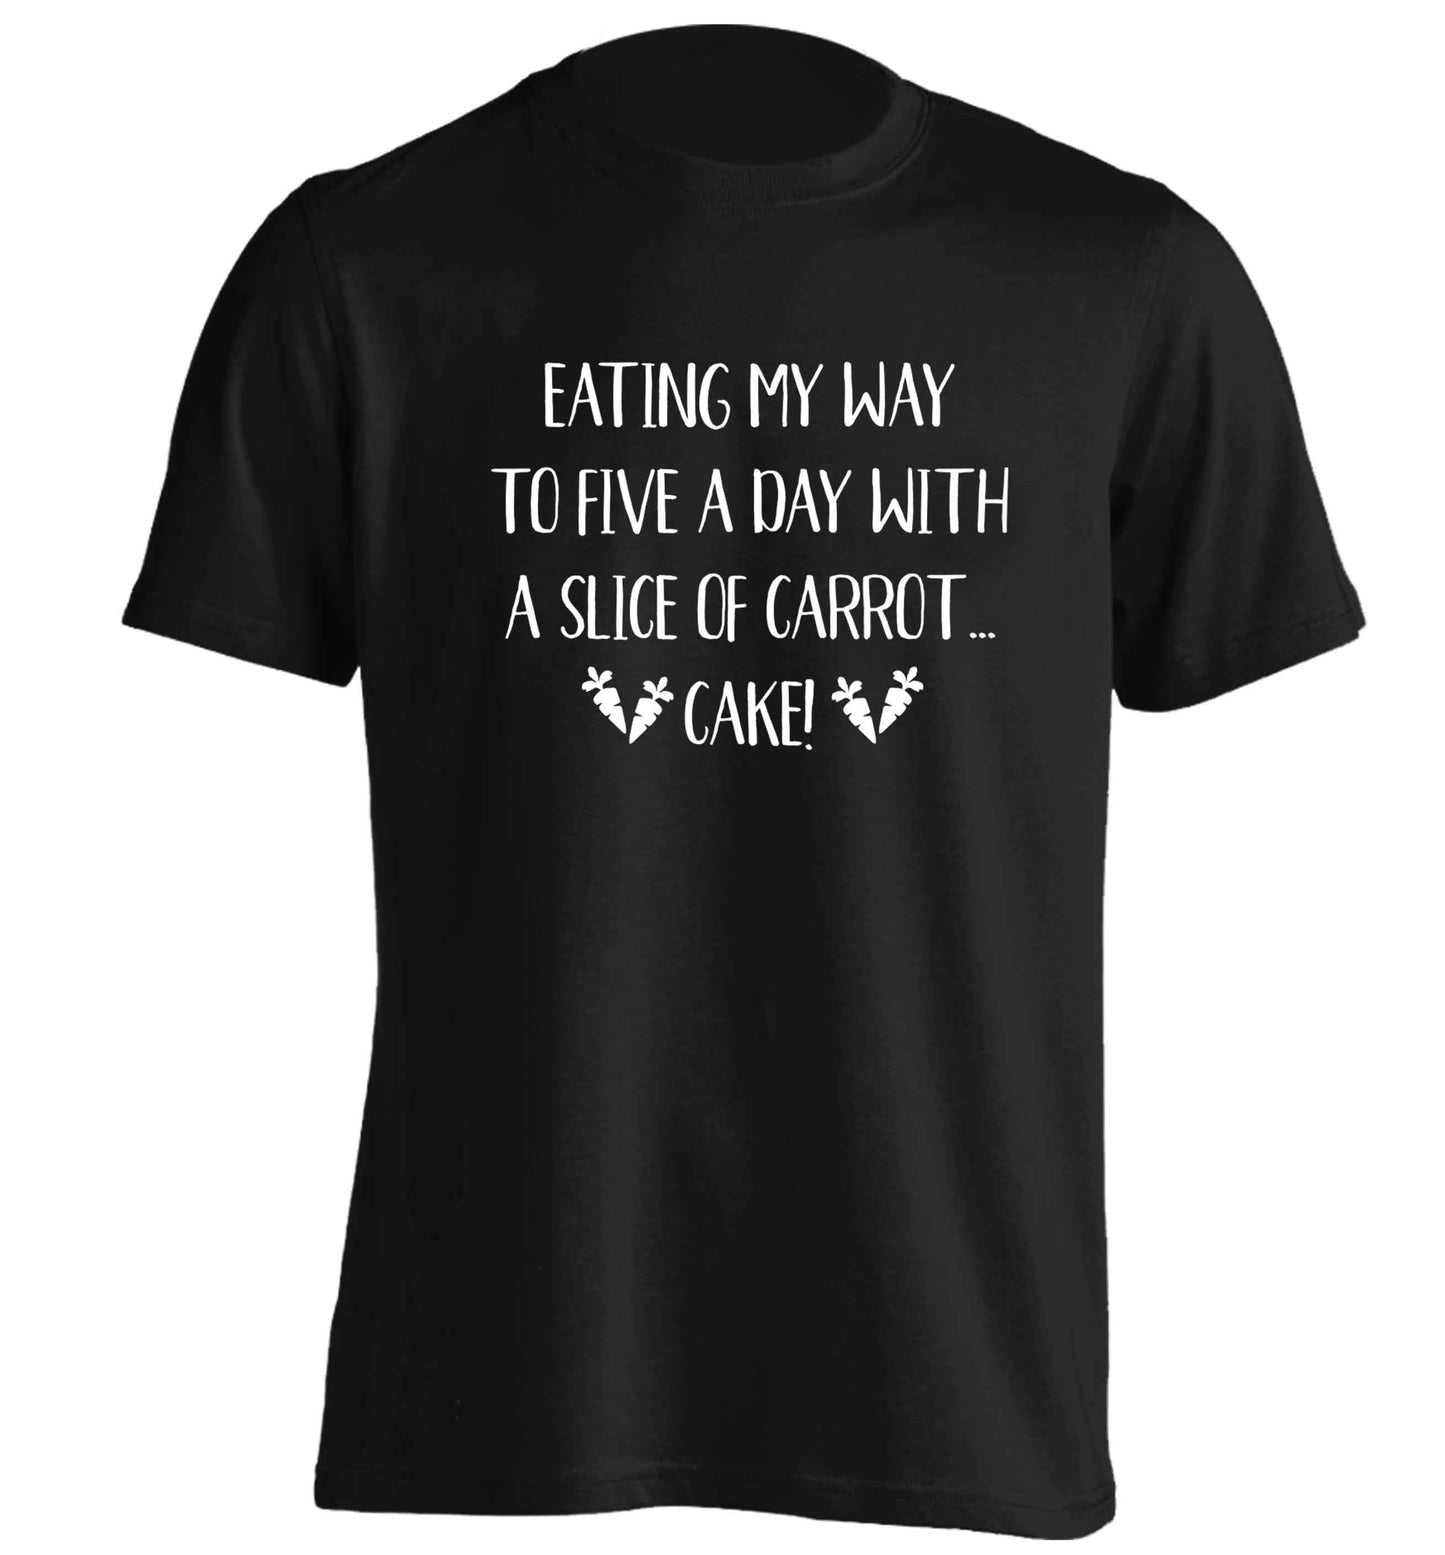 Eating my way to five a day with a slice of carrot cake day adults unisex black Tshirt 2XL